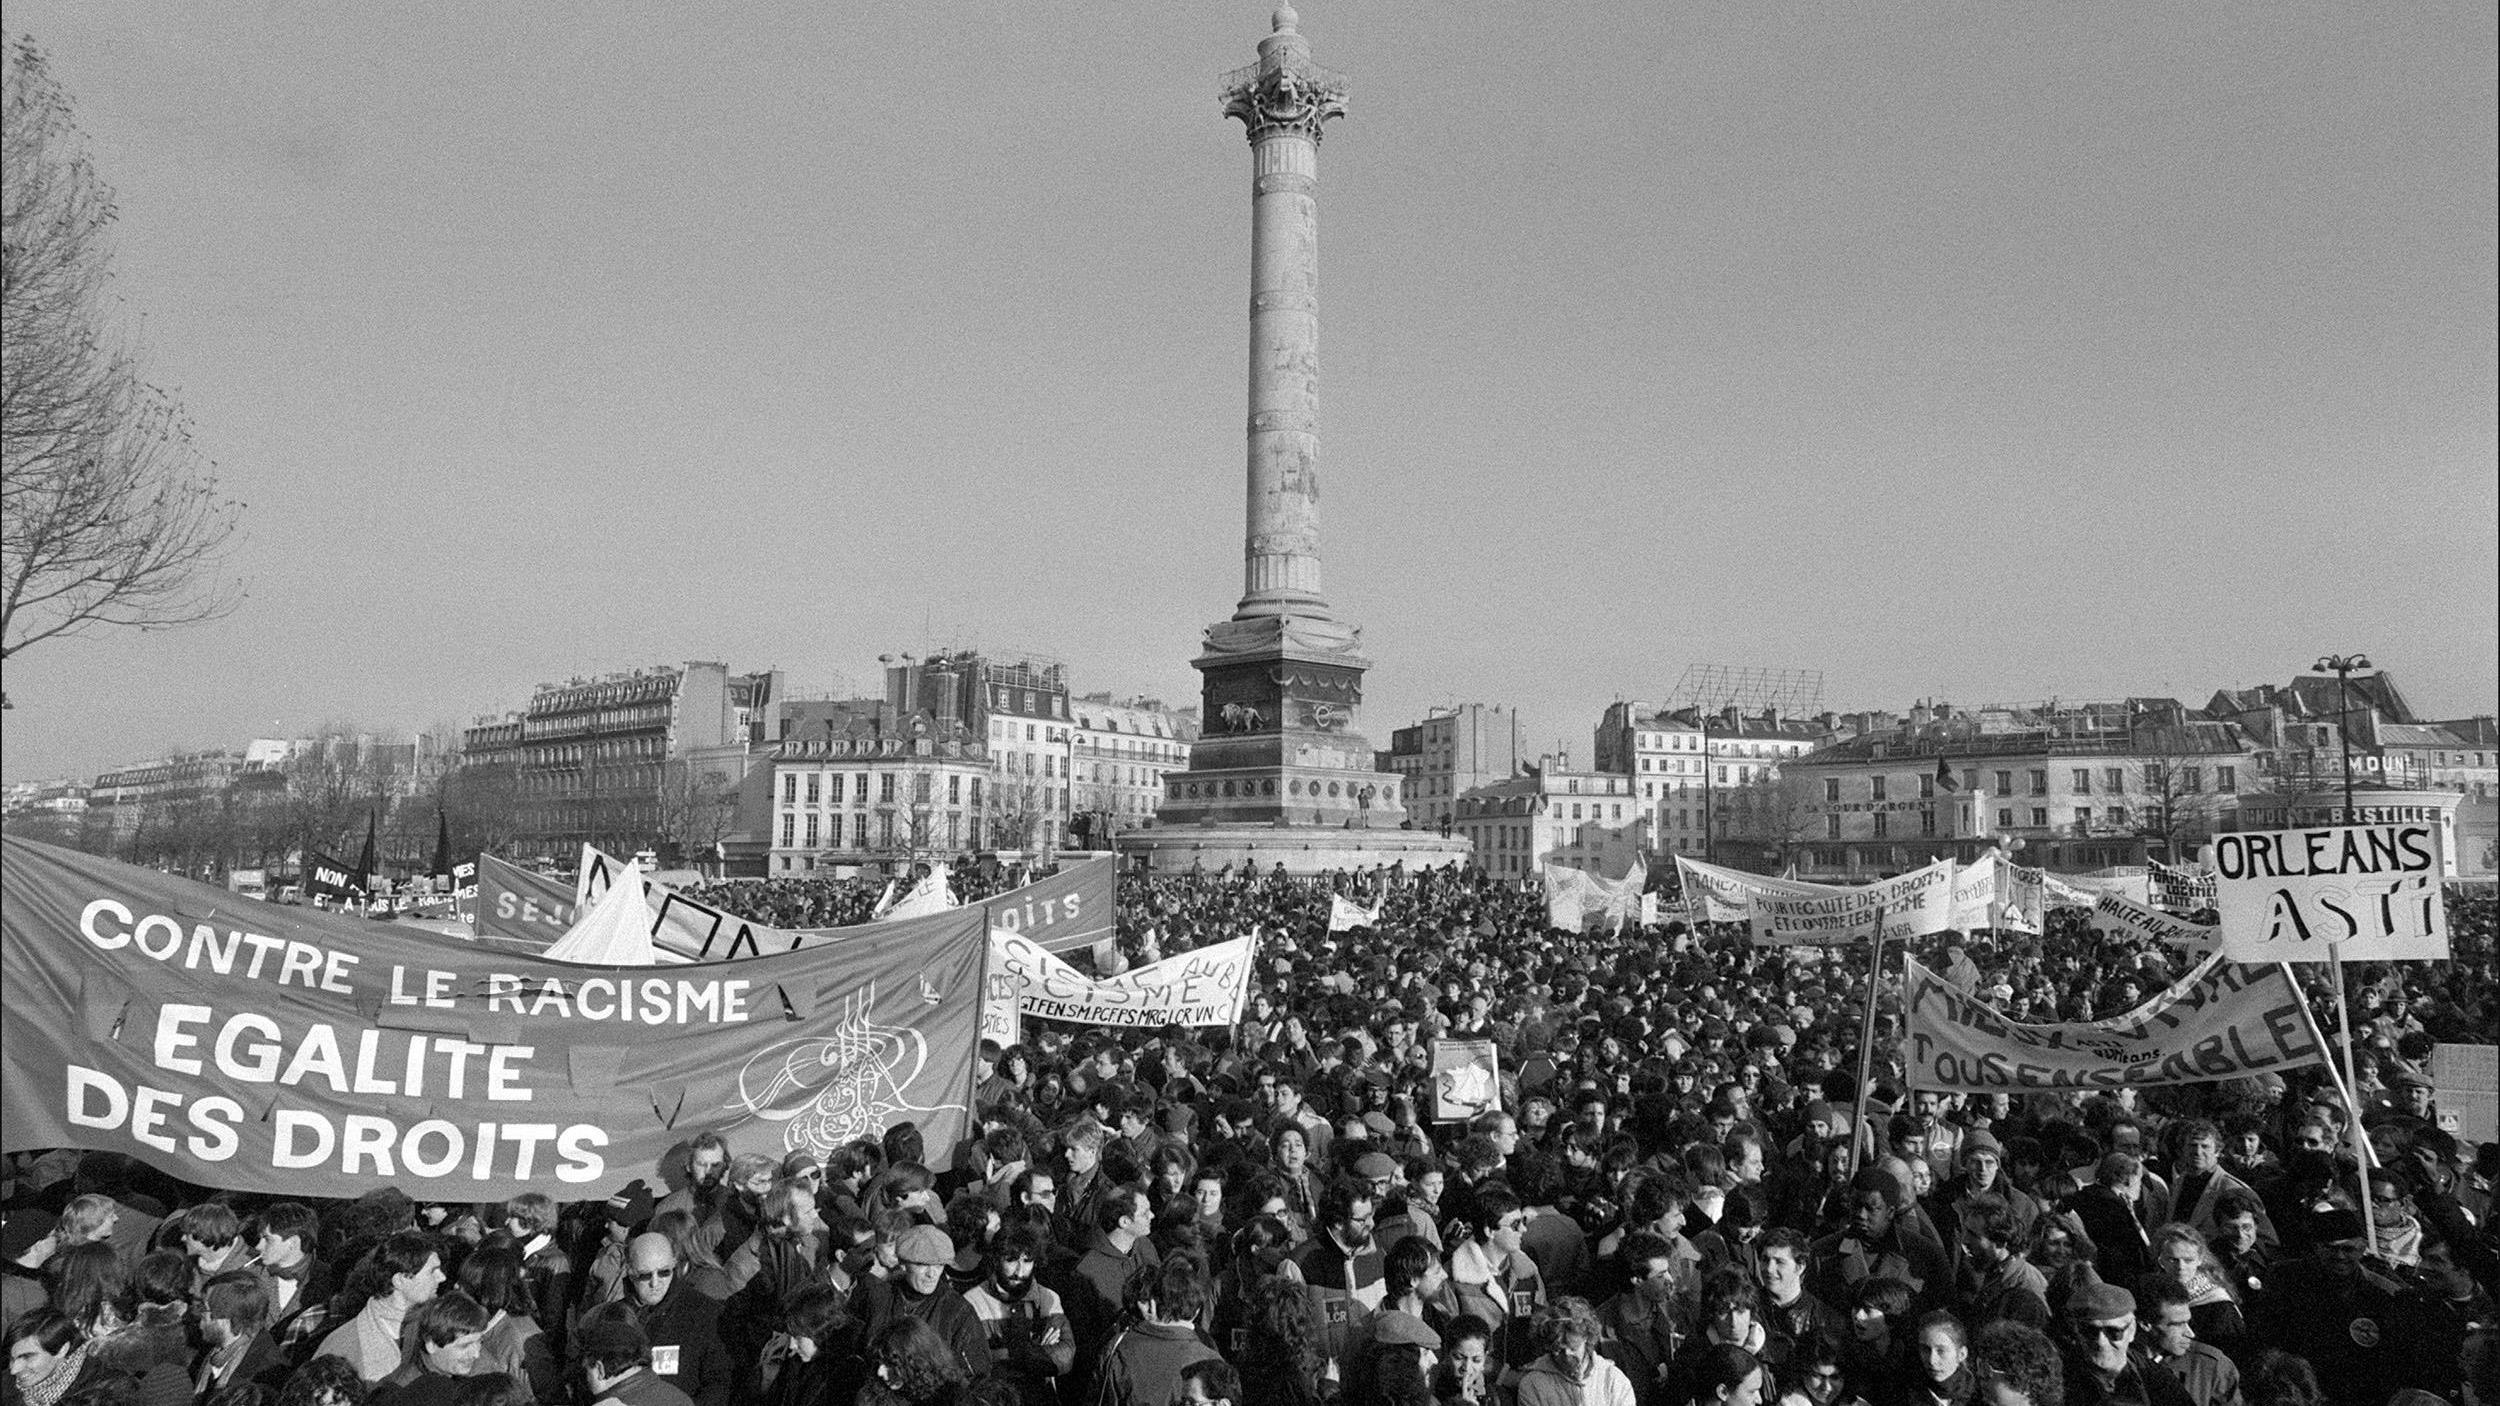 October 15, 1983 marks the beginning of the March for Equality and Against Racism. This is the first event of its kind in France.